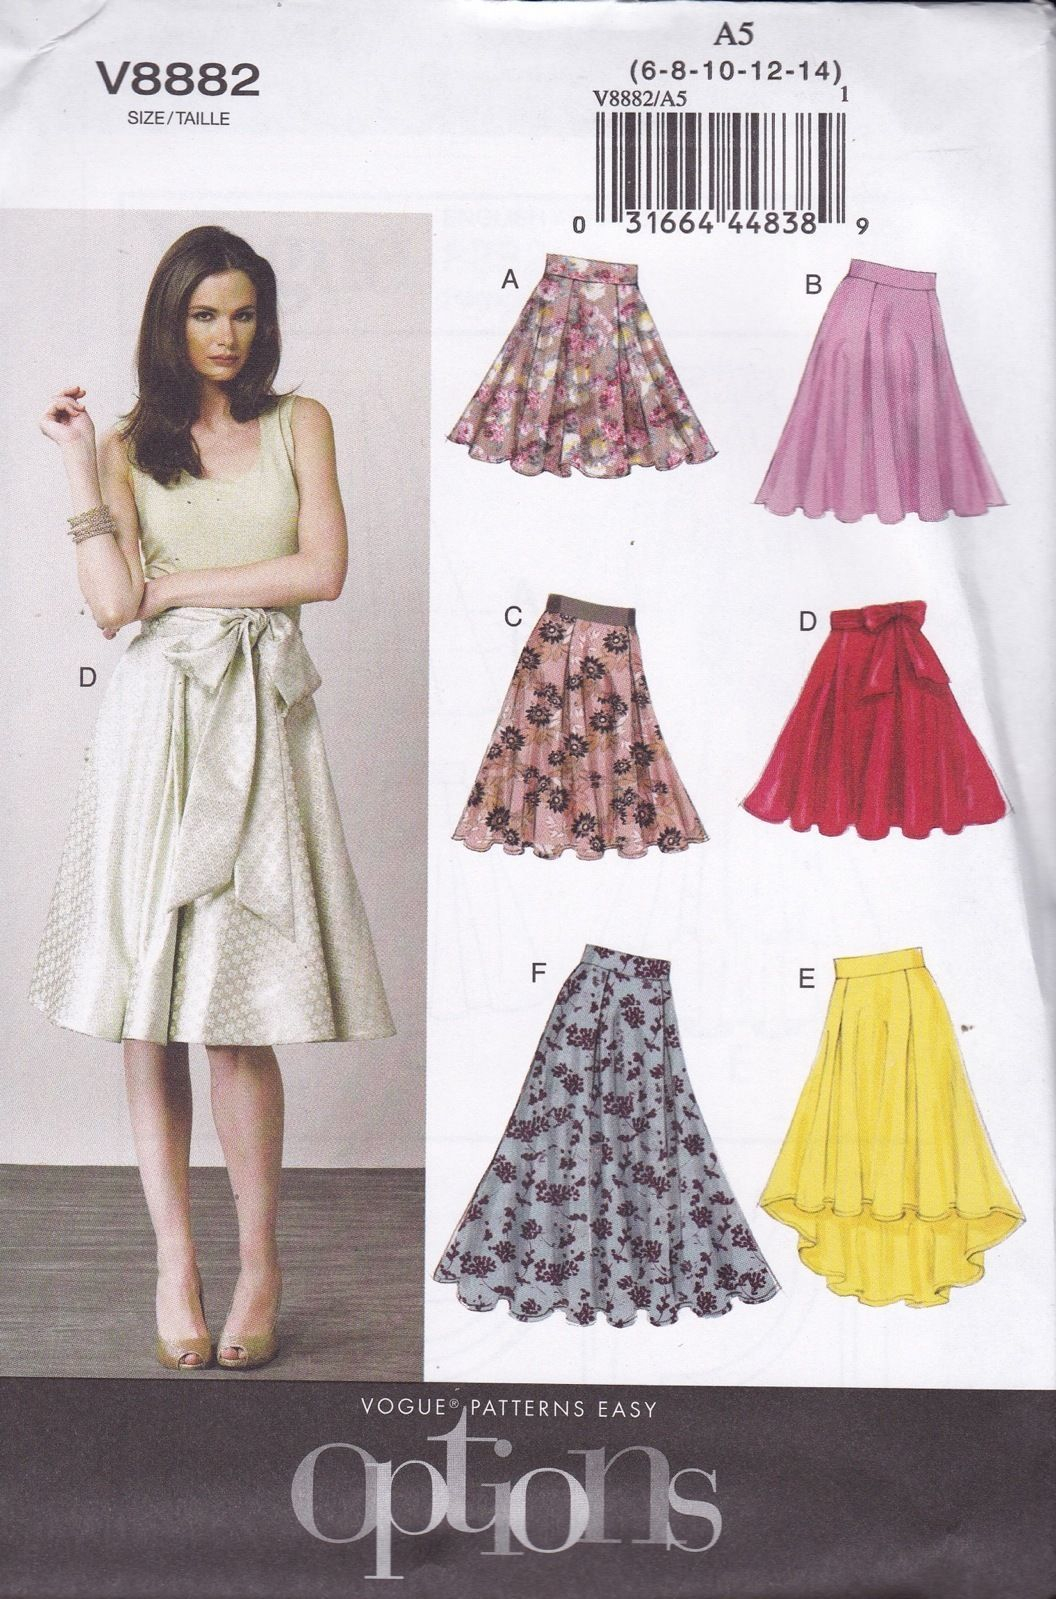 27+ Great Picture of Easy Sewing Patterns - figswoodfiredbistro.com